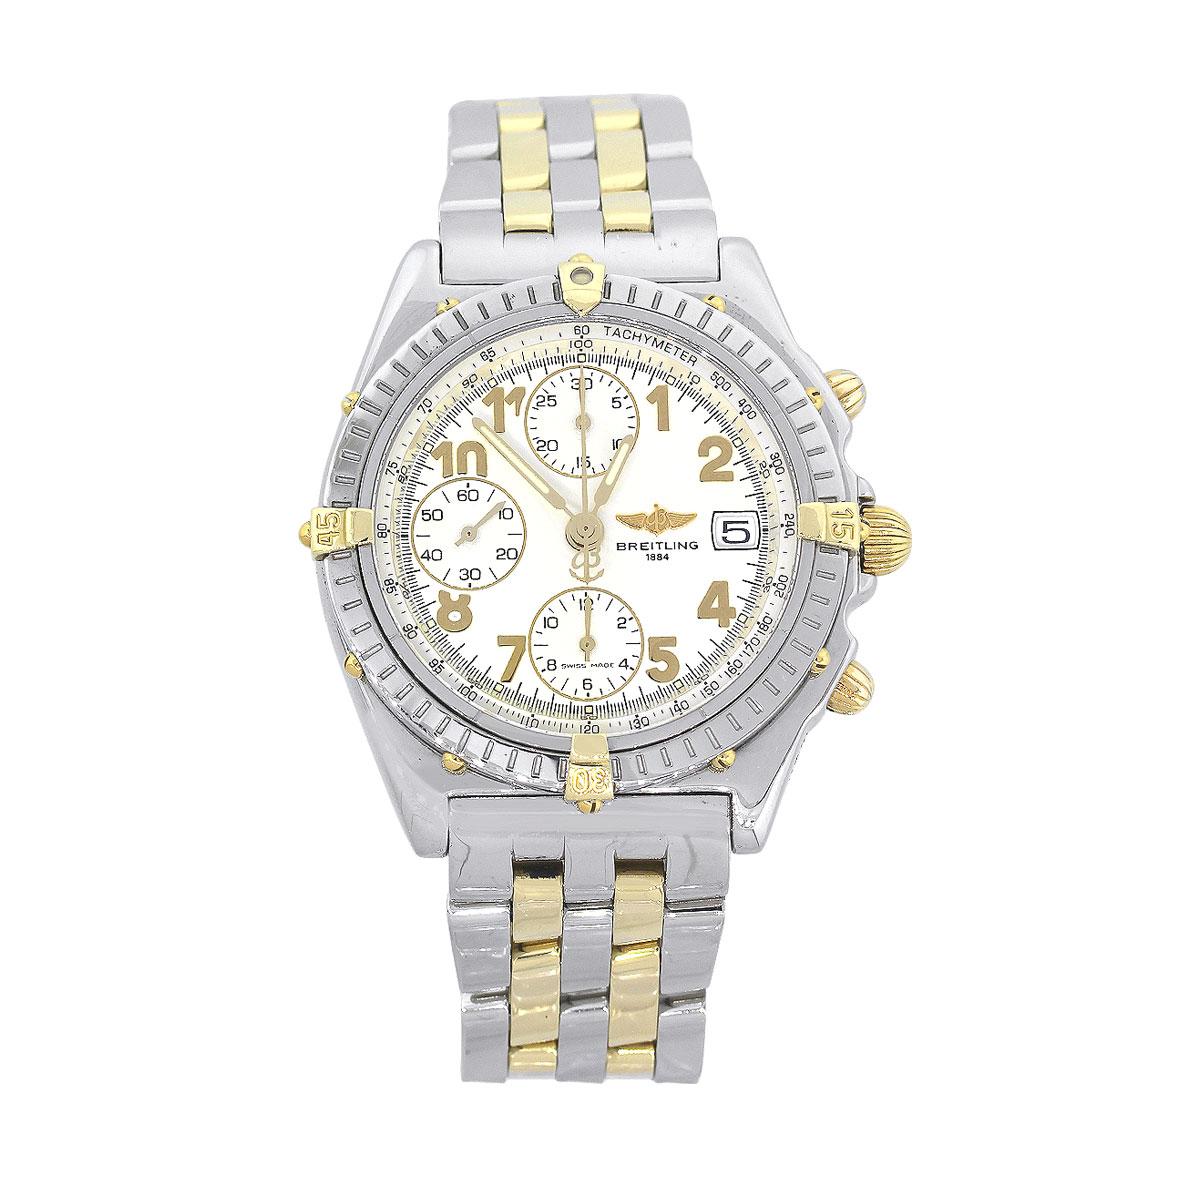 Brand: Breitling
MPN: B13050
Model: Chronomat
Case Material: Stainless Steel
Case Diameter: 40mm
Crystal: Sapphire crystal
Bezel: Two Tone unidirectional Bezel
Dial: White chronograph dial with yellow gold hands and numeral markers, 3 sub dials and